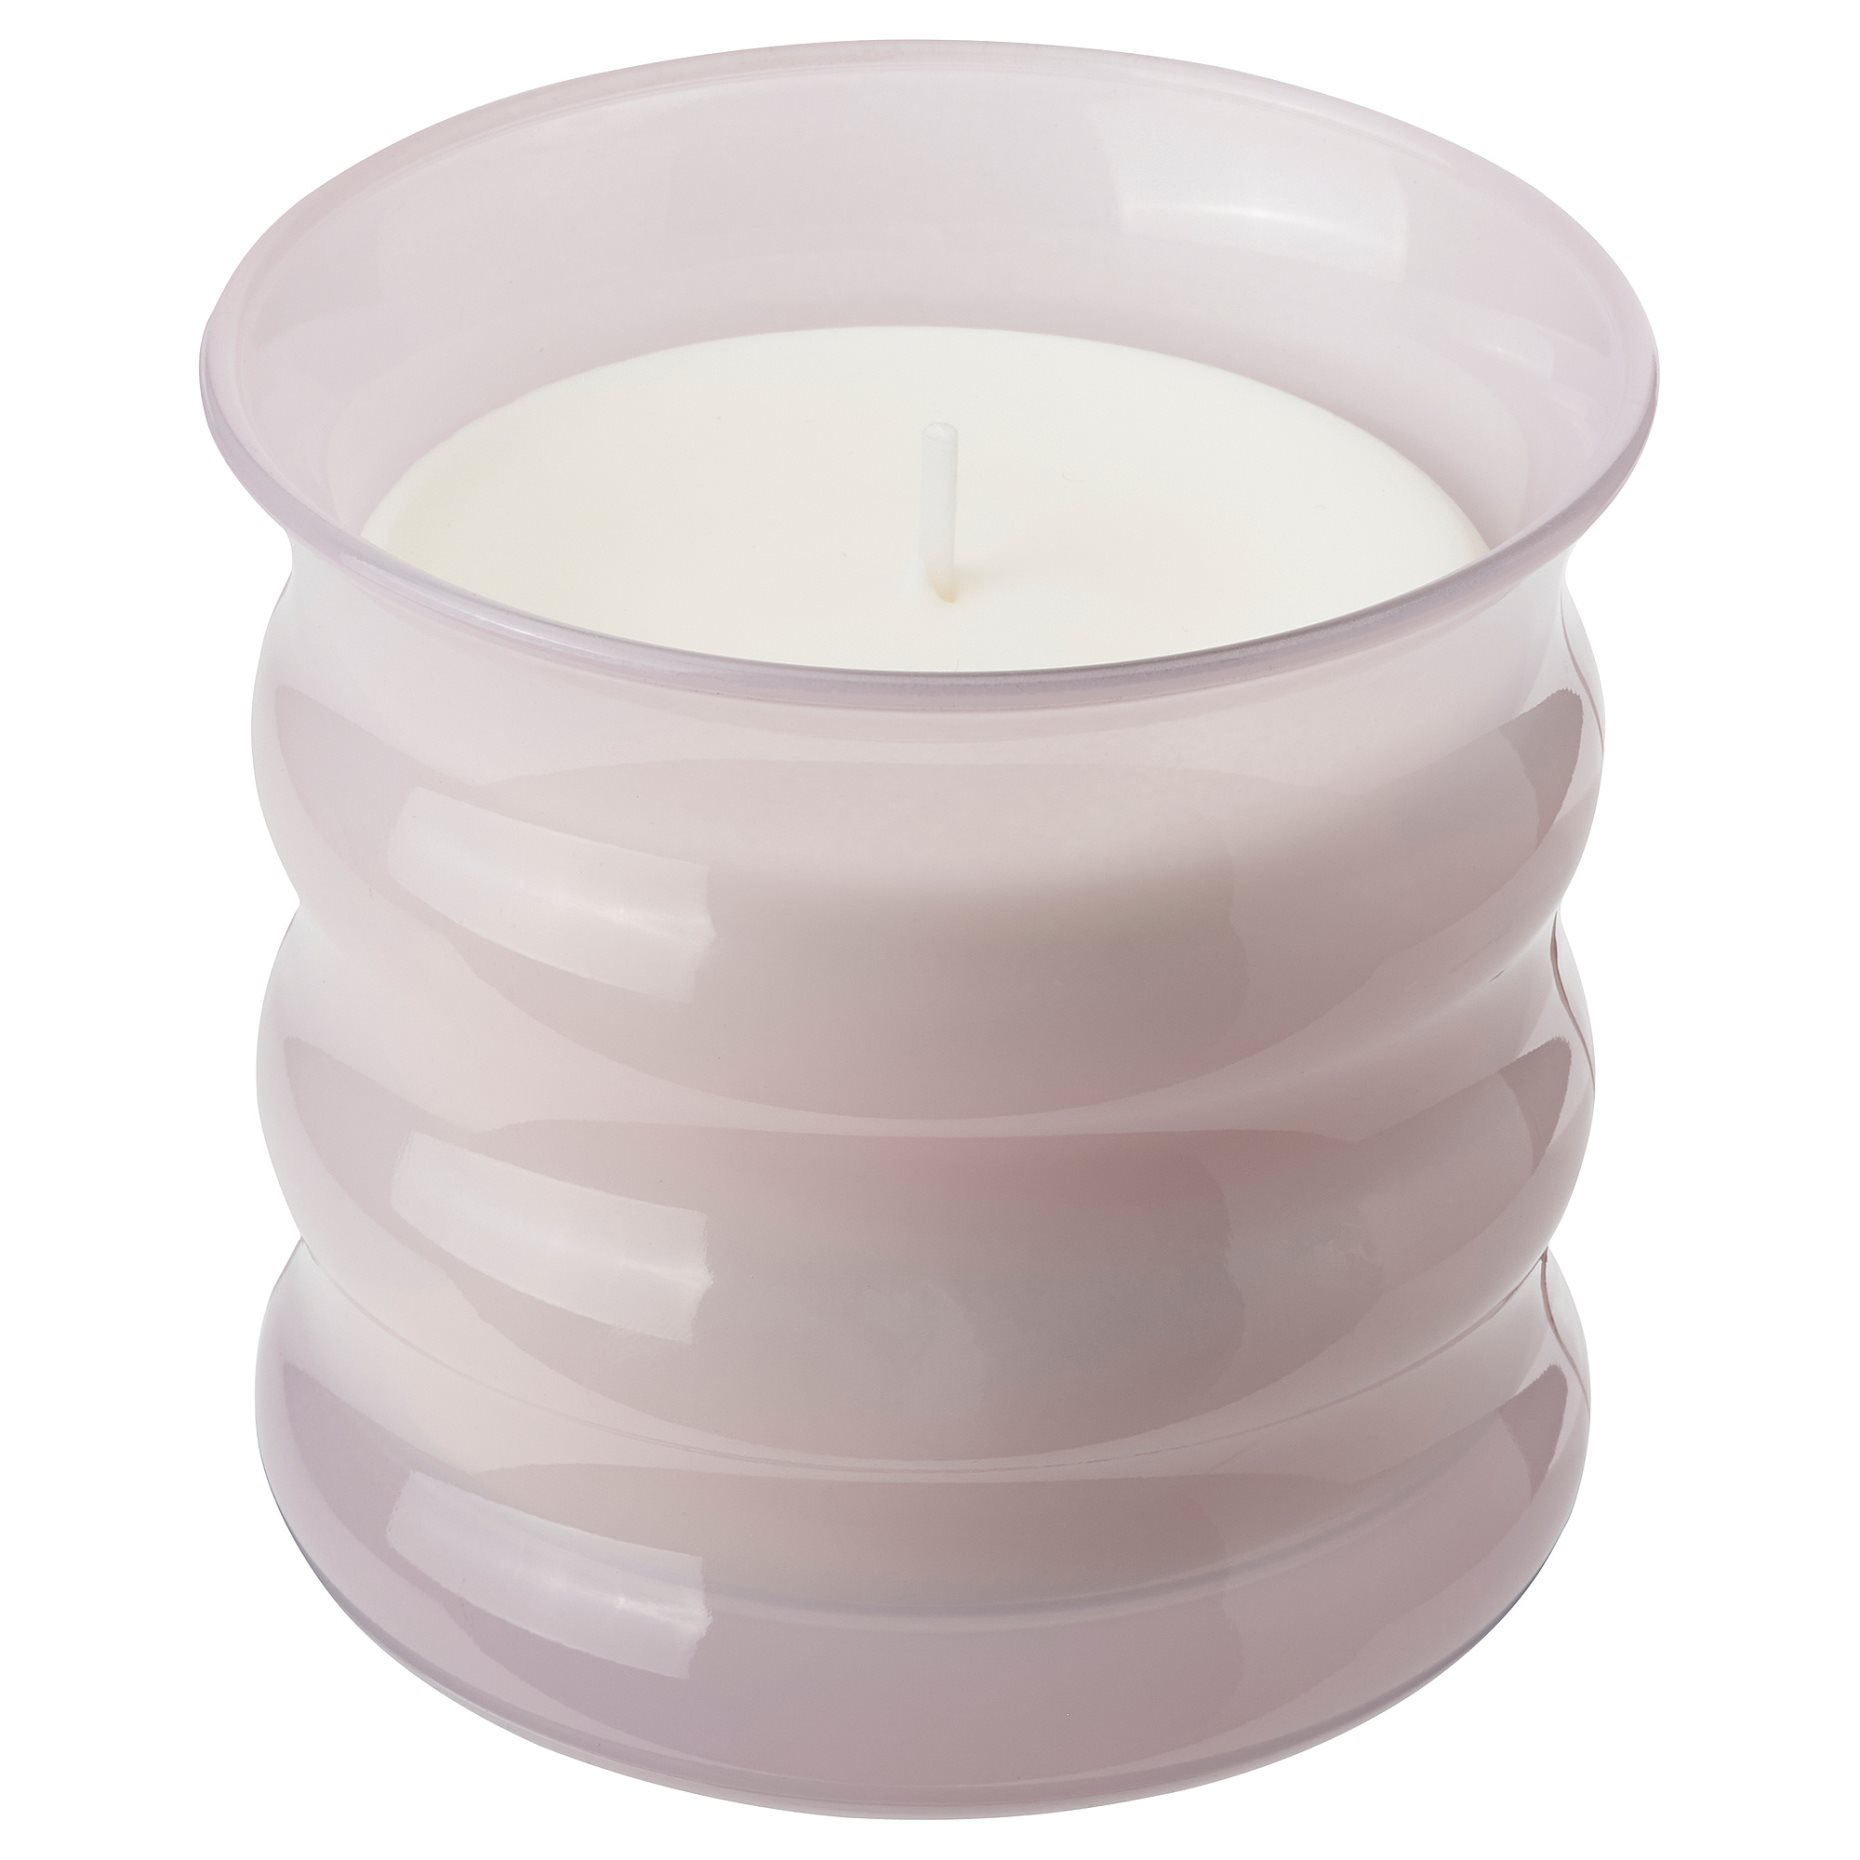 LUGNARE, scented candle in glass/Jasmine, 50 hr, 605.021.50